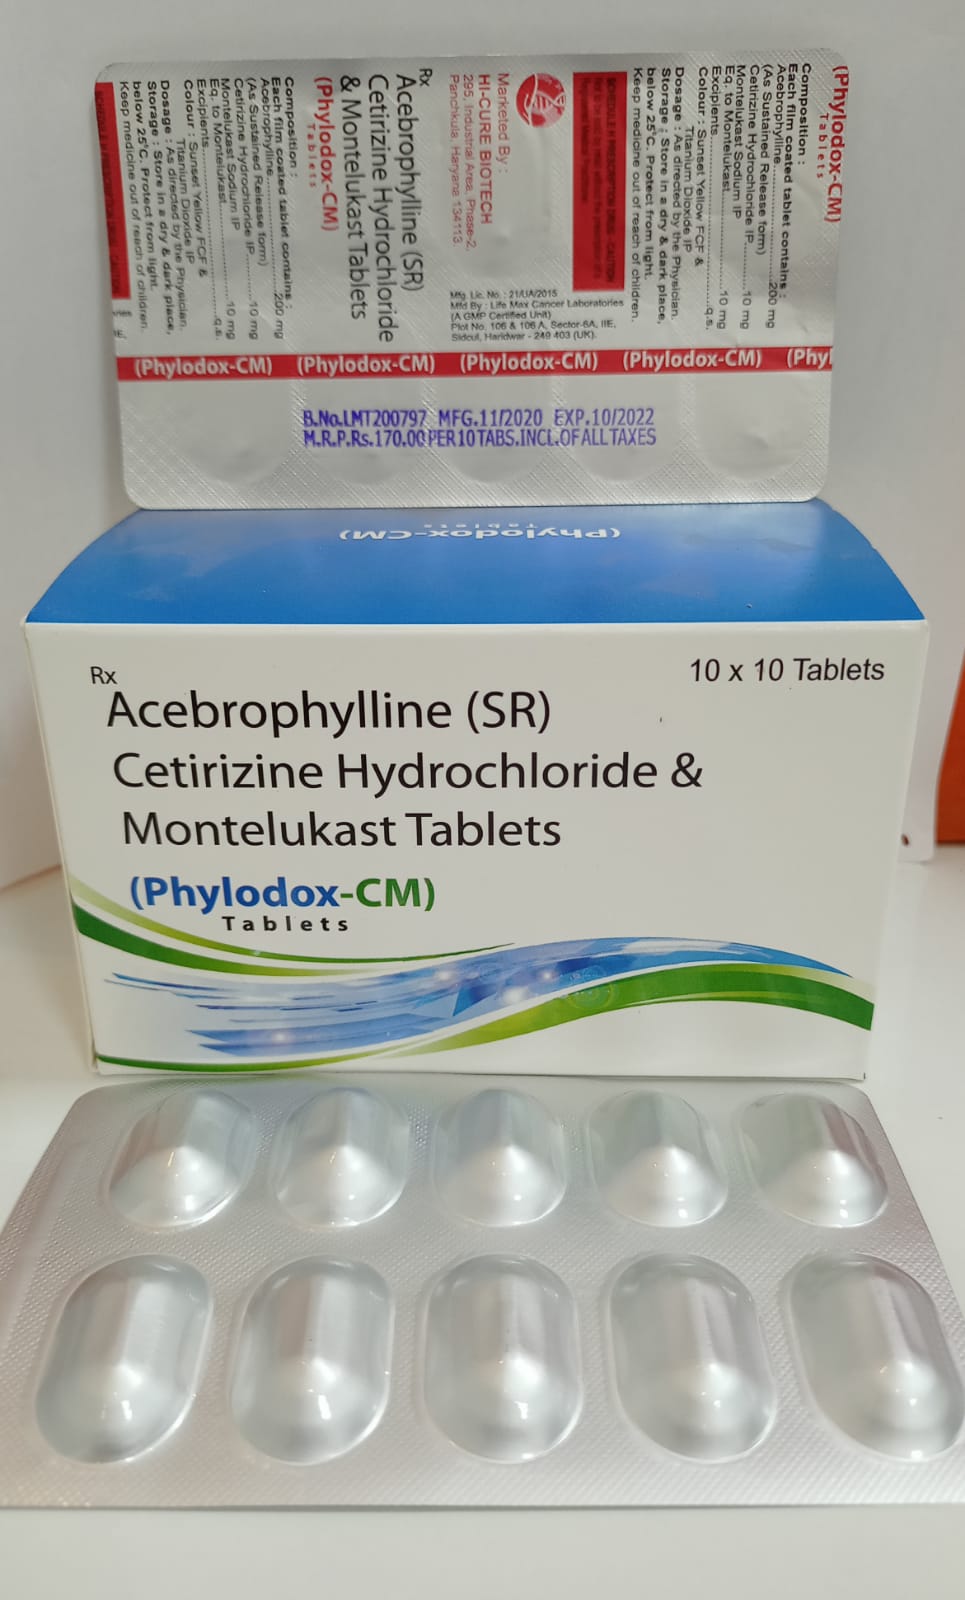 Product Name: PHYLODOX CM, Compositions of PHYLODOX CM are ACEBROPHYLLINE 200MG (SR), CETRIZINE 10MG, MONTELUKAST 10MG - Reomax Care